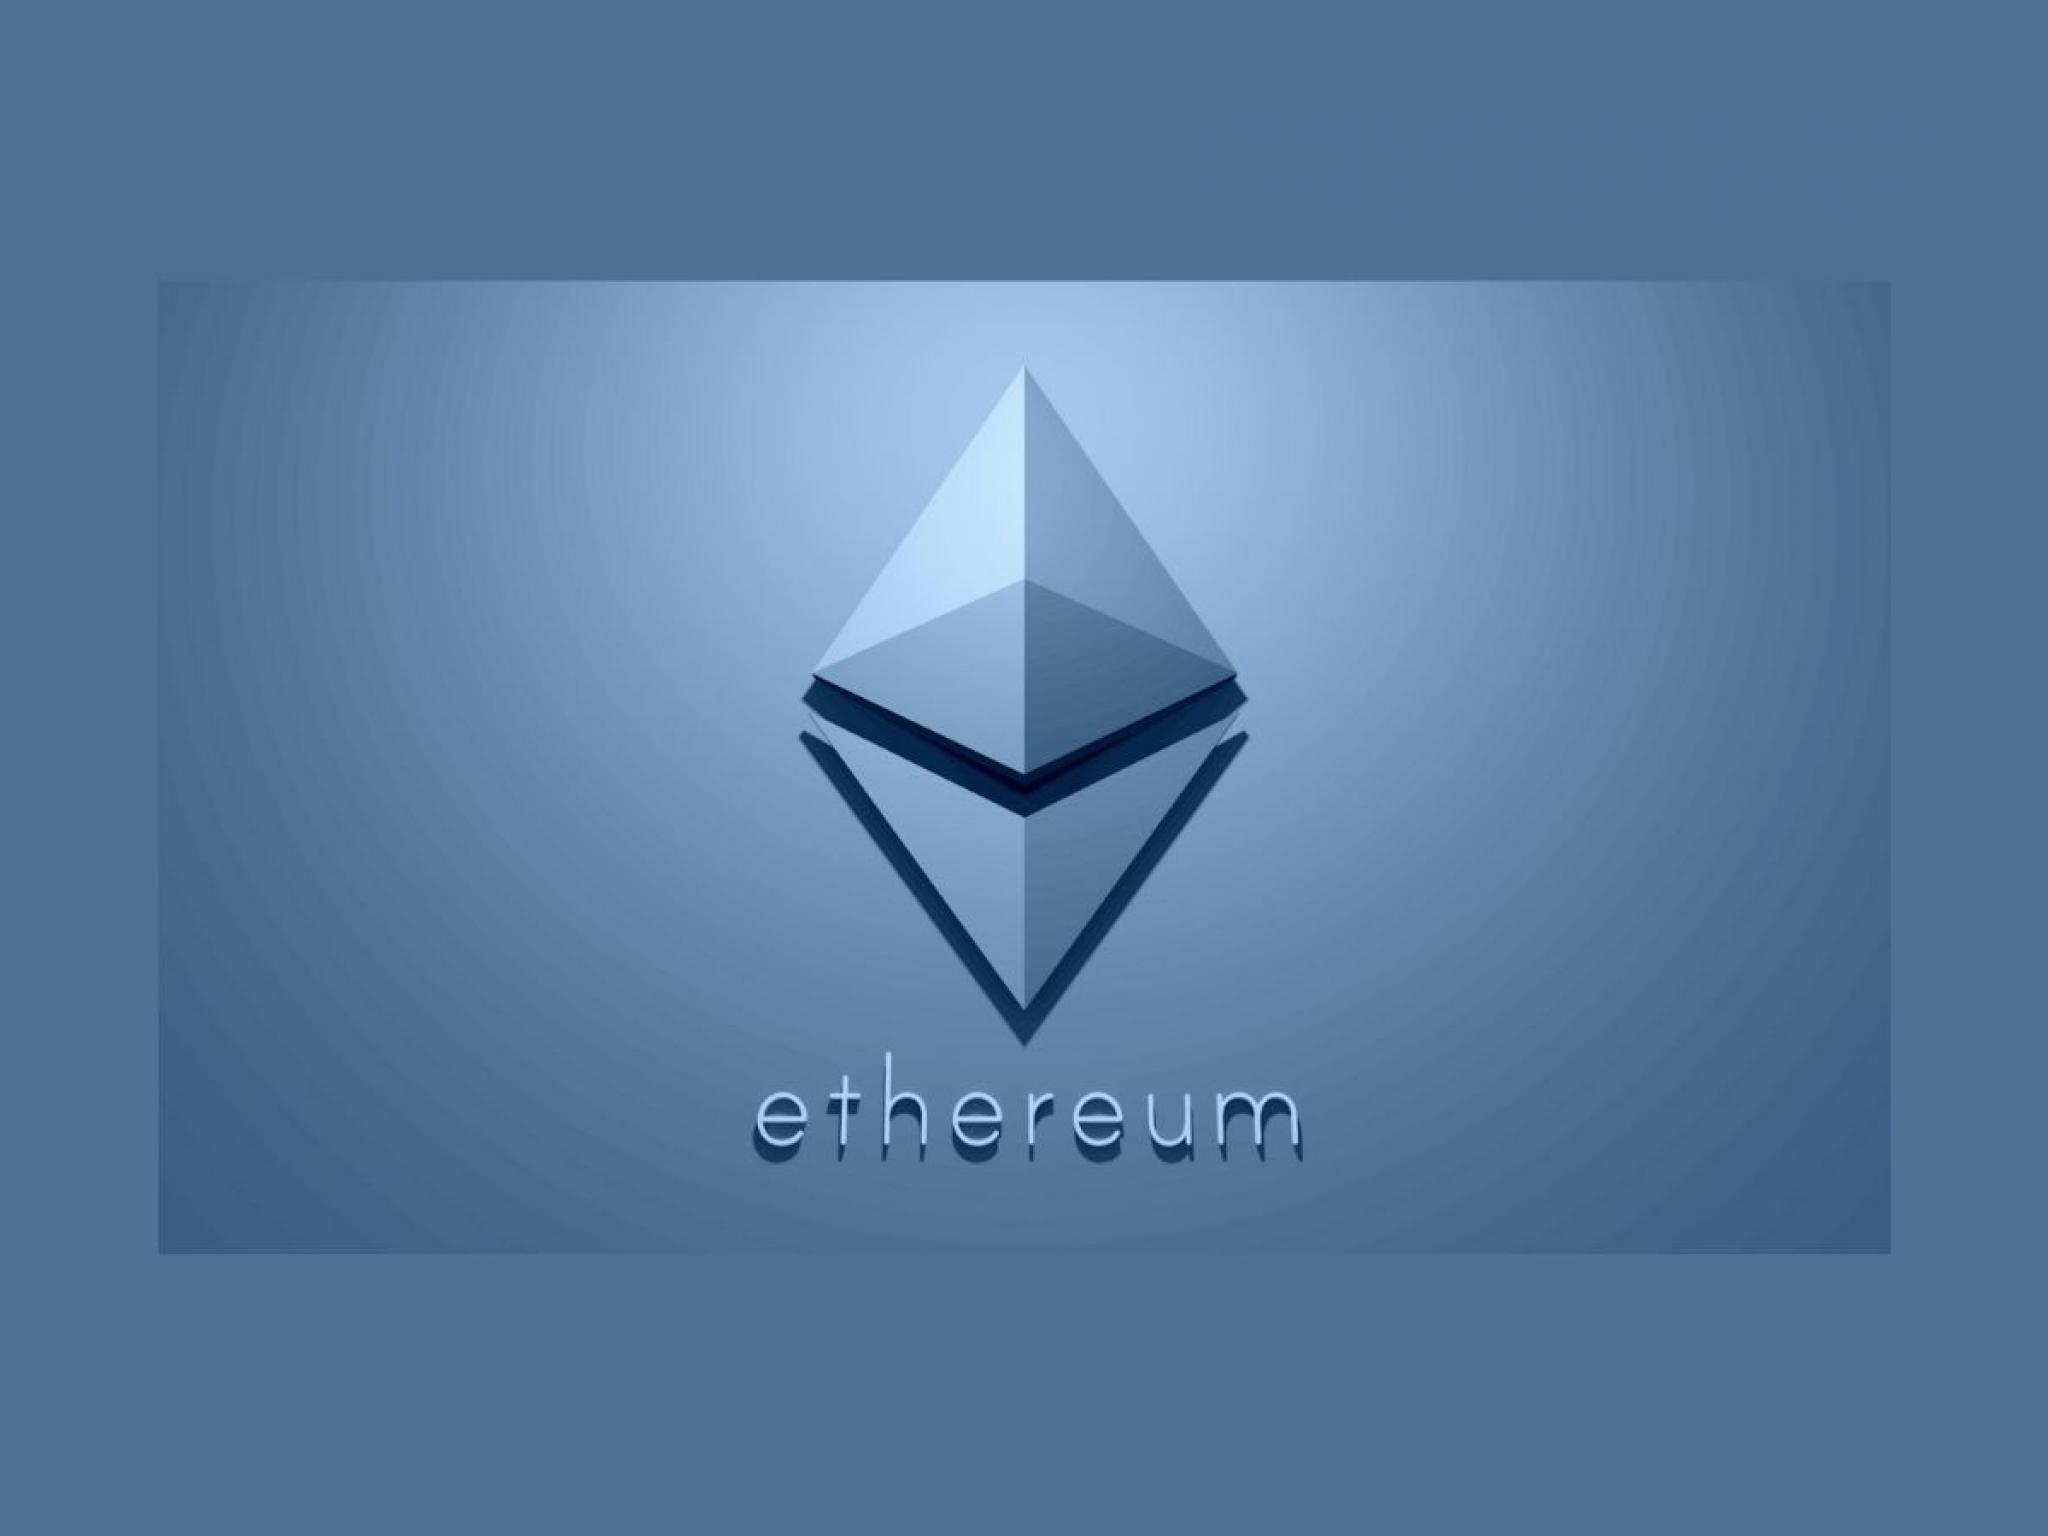  ethereum-edges-lower-xdc-network-pepe-among-top-losers 